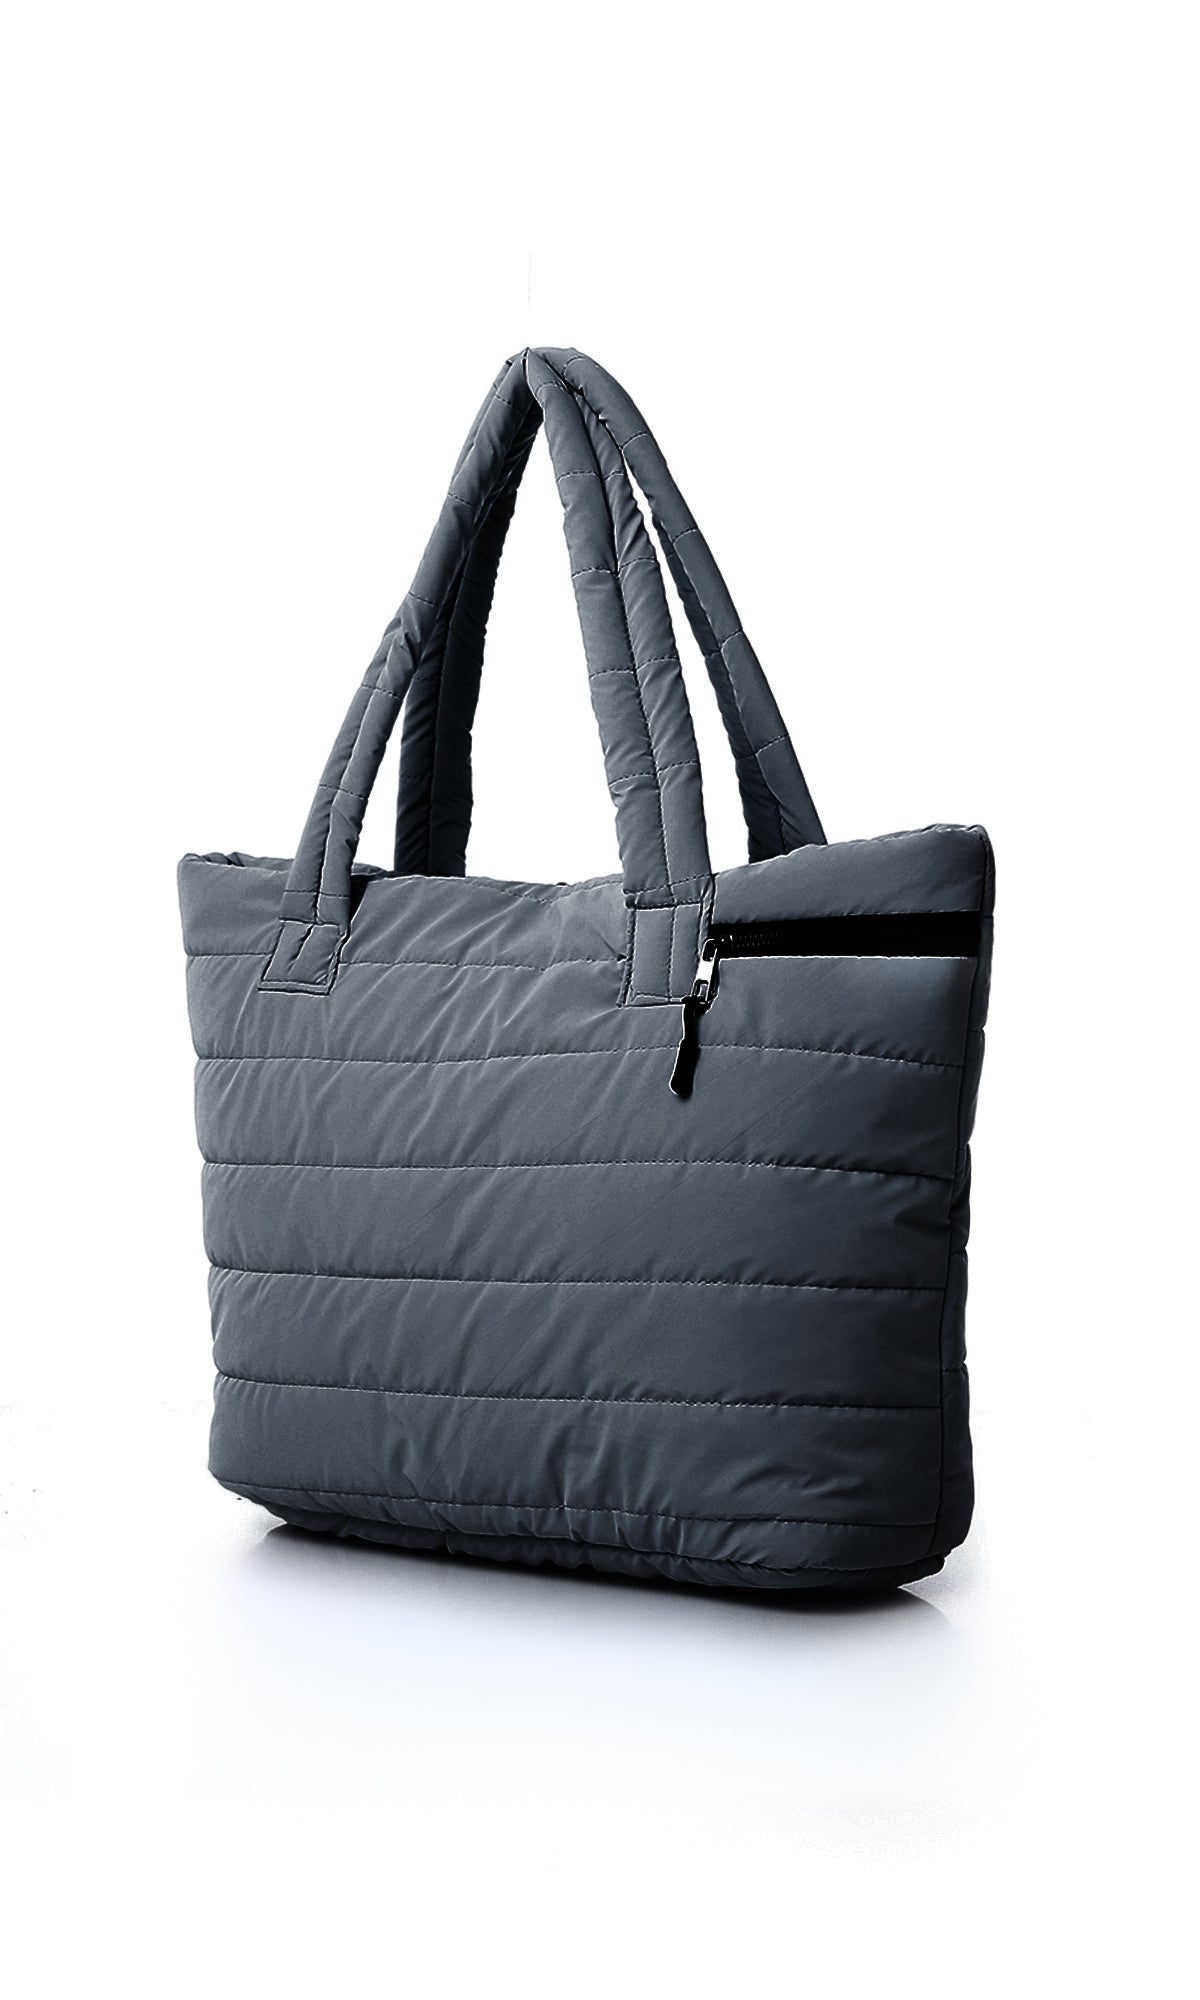 O181883 Zipped Casual Dark Grey Quilted Hand-Bag